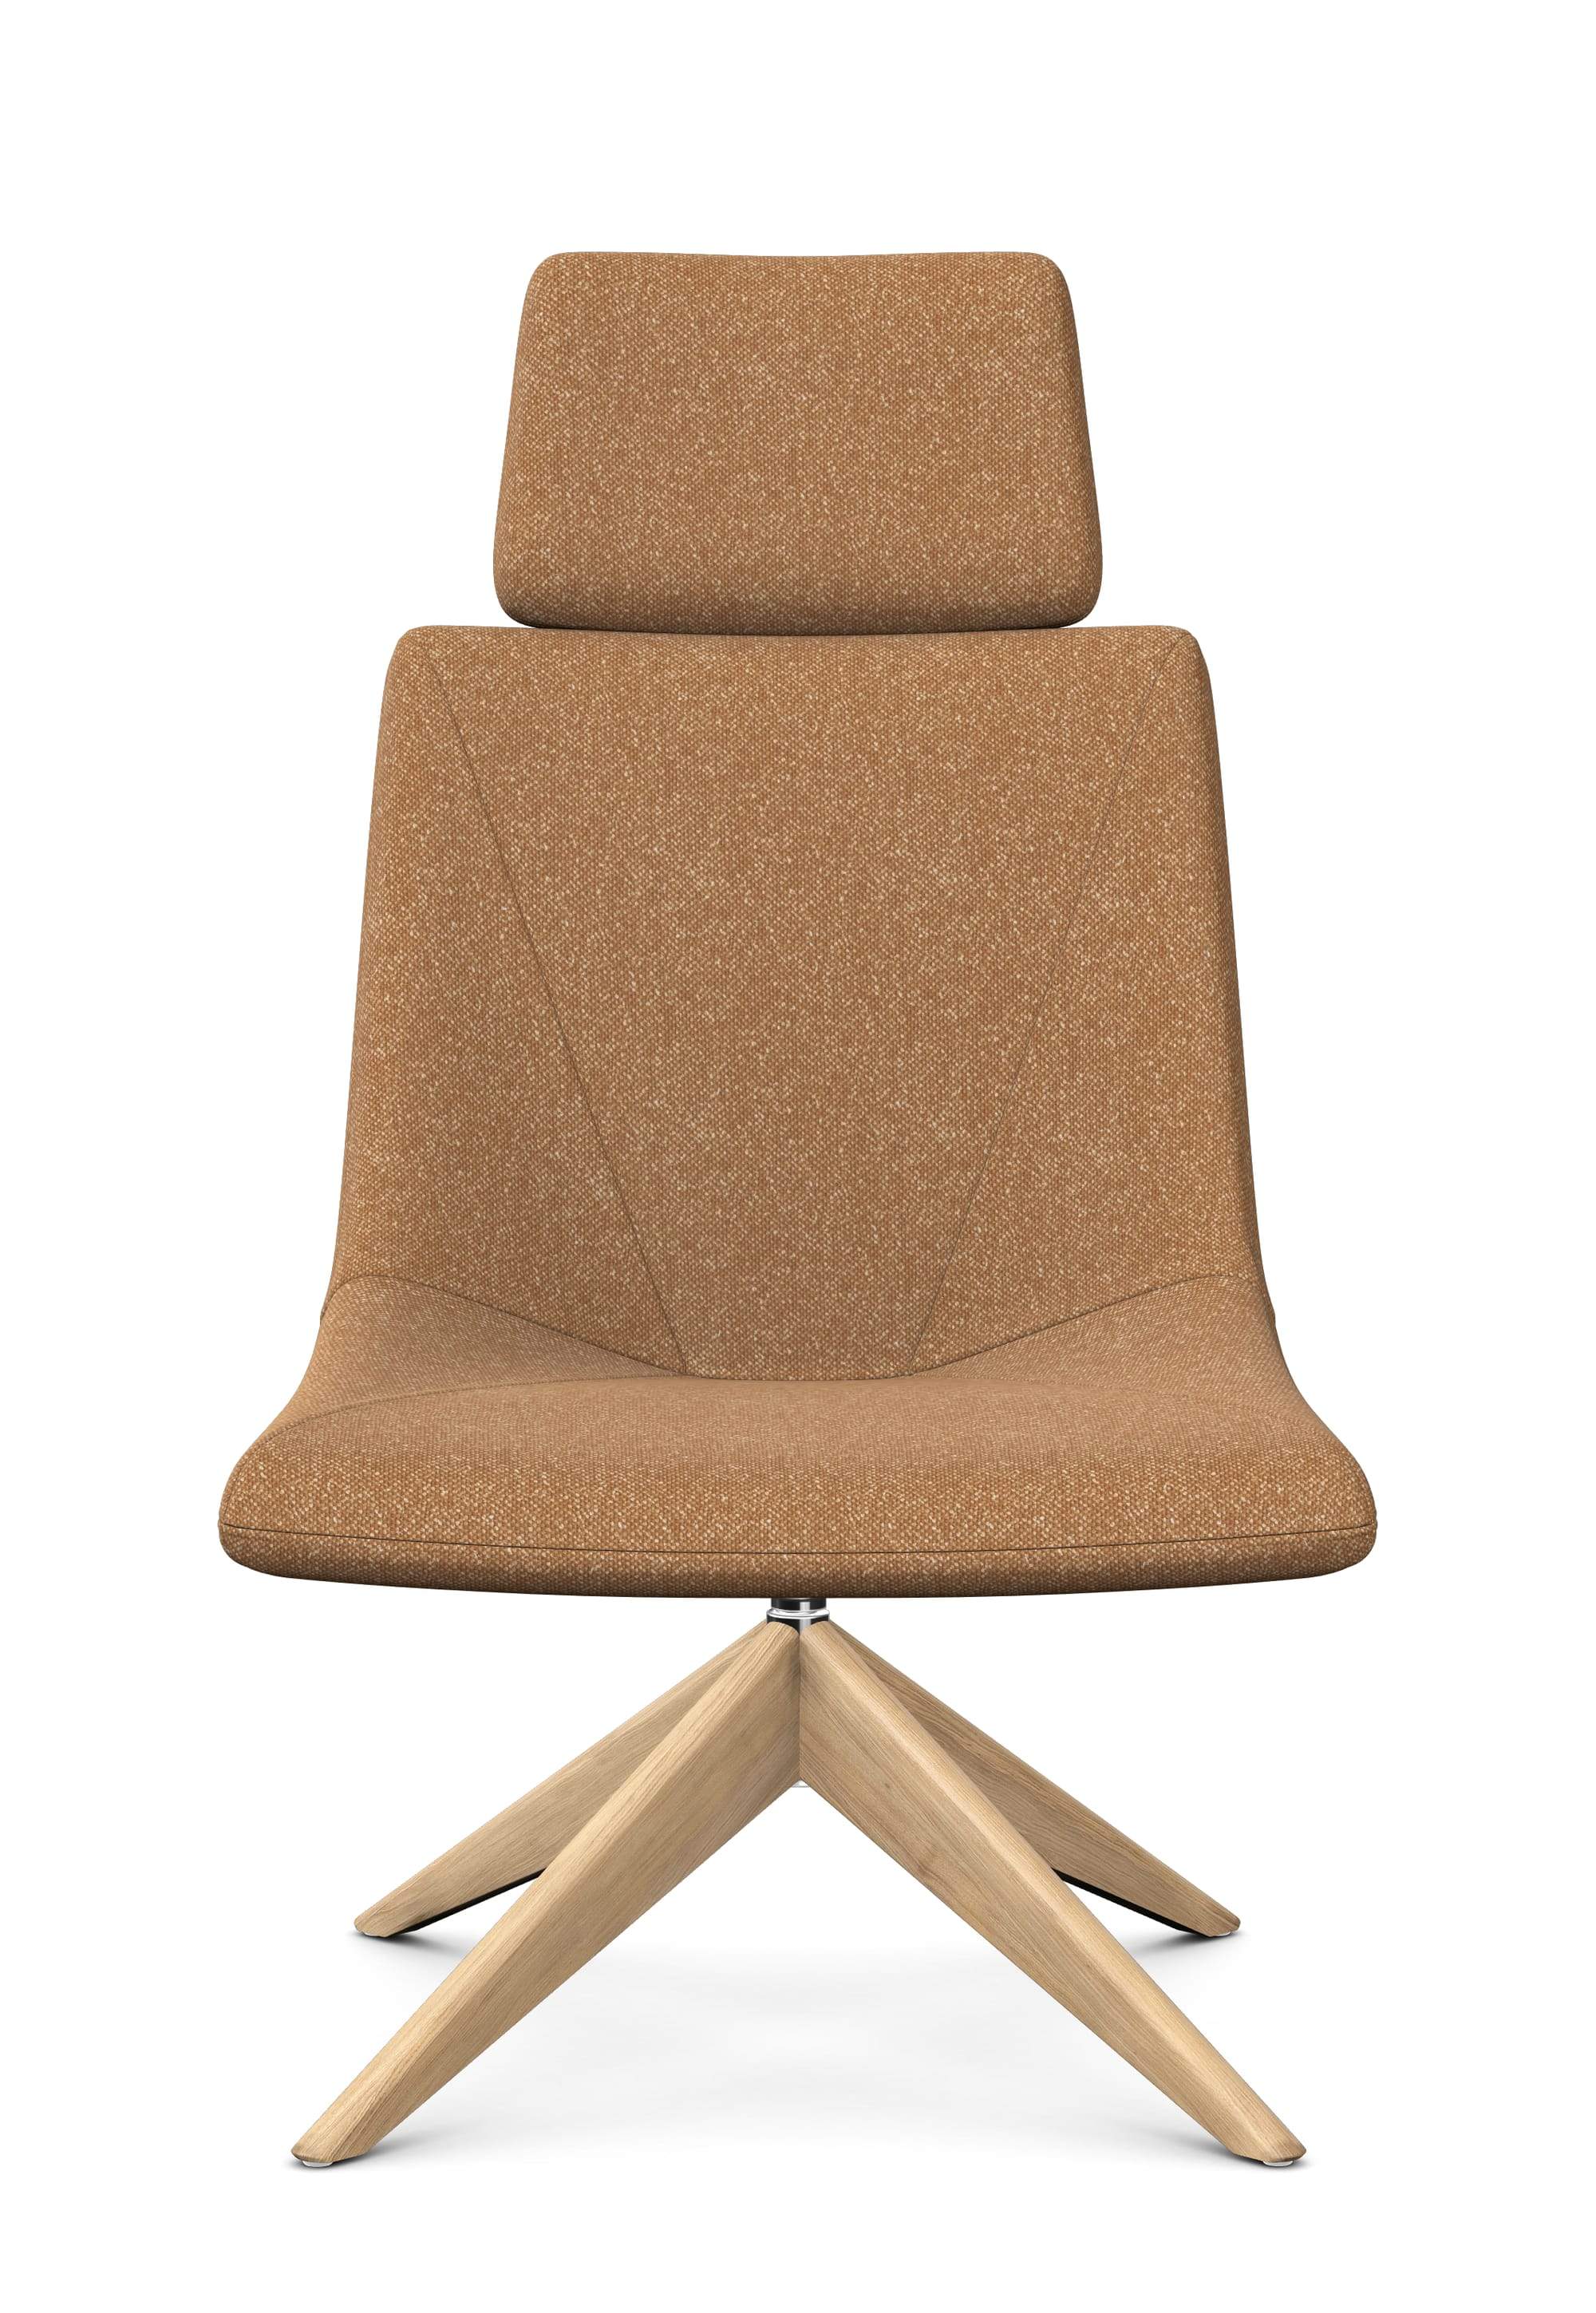 REMI - Extra Large Chair with Headrest, Pyramidal Wooden Base